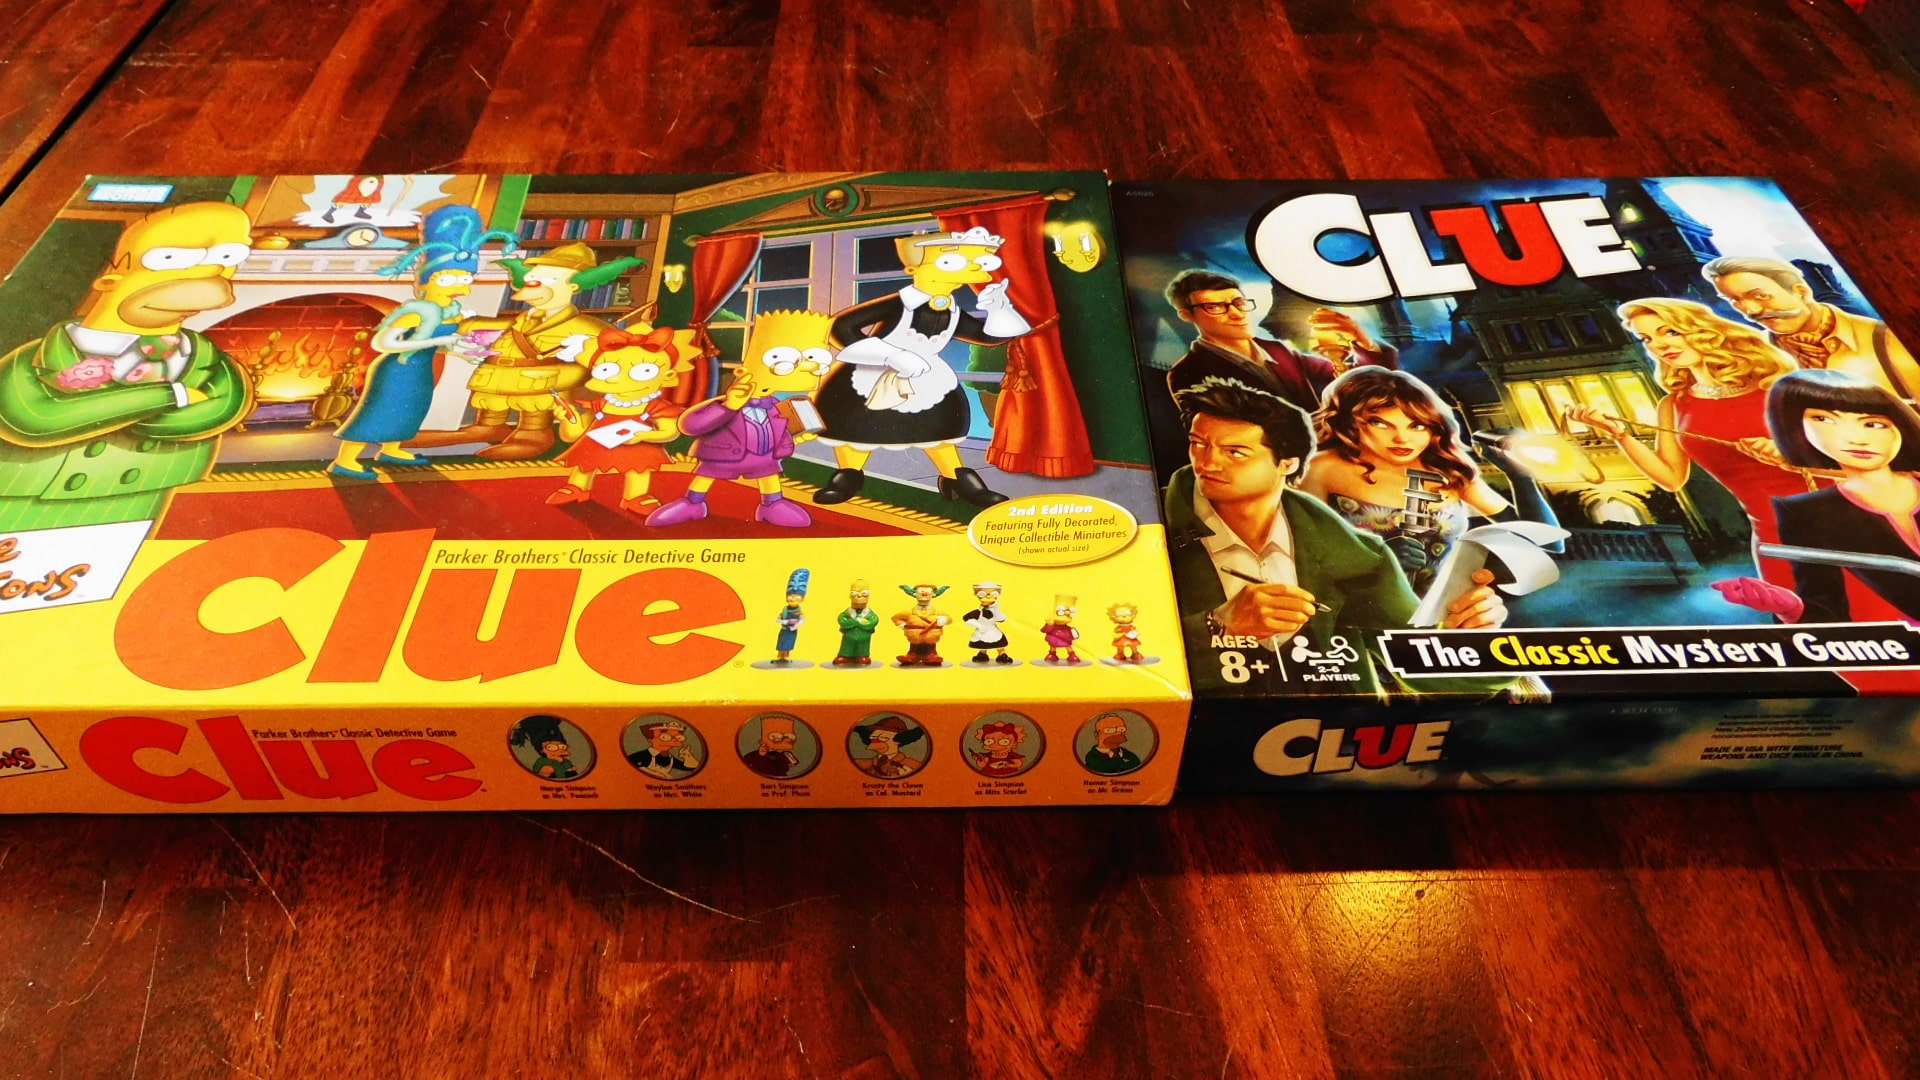 The box covers for Simpsons Clue 2nd Edition and Clue.